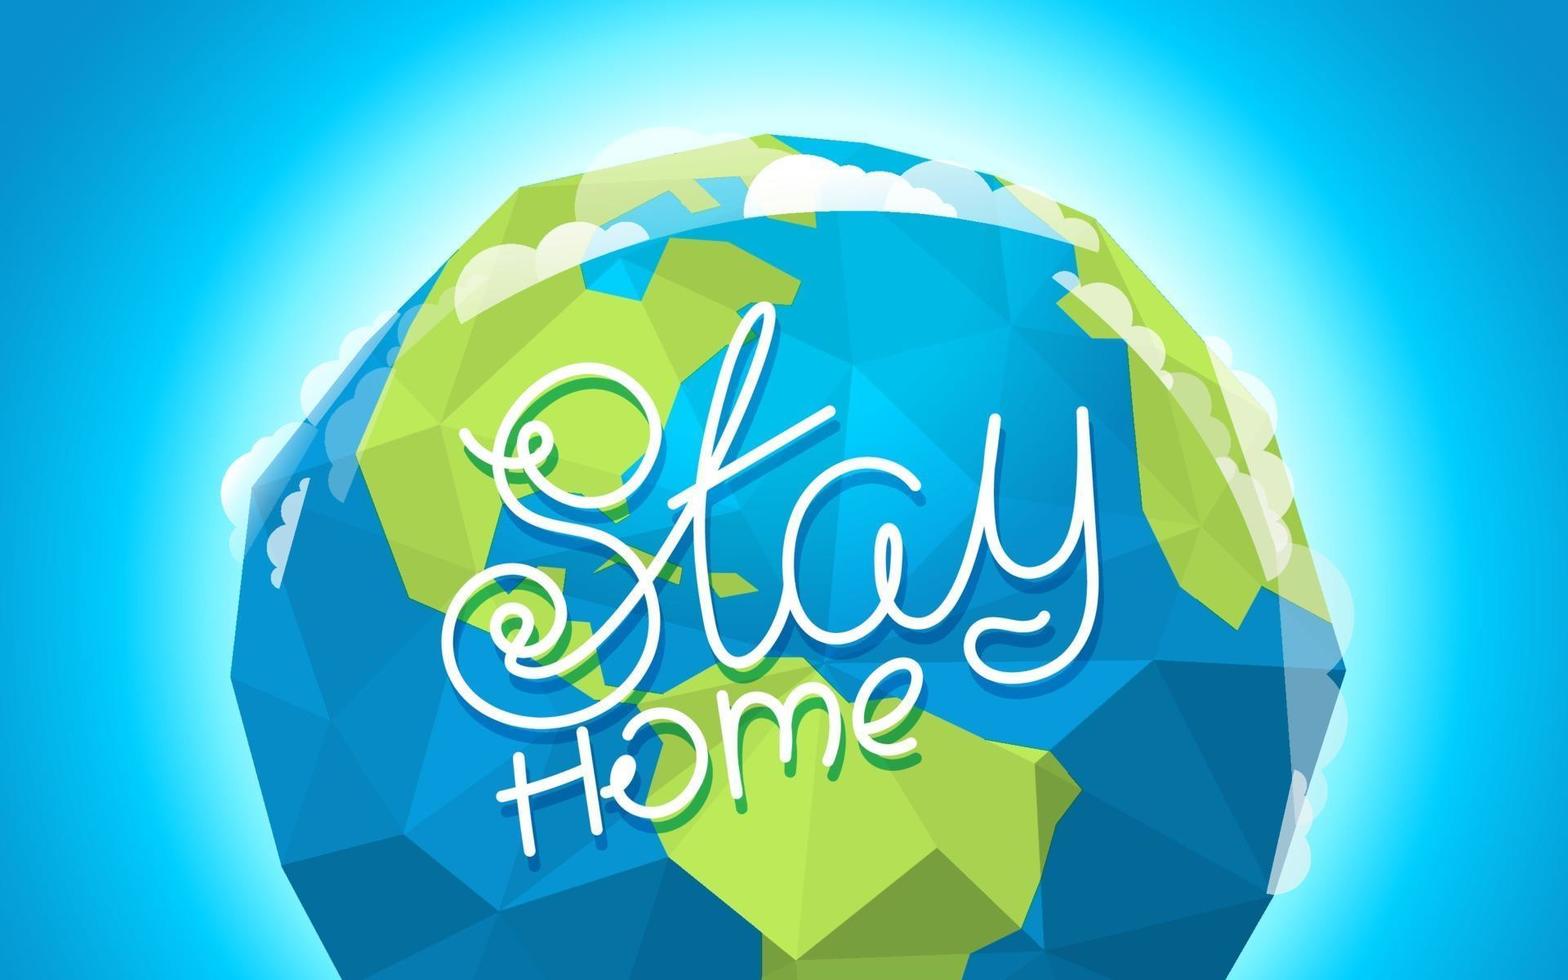 Stay home vector illustration with the Earth